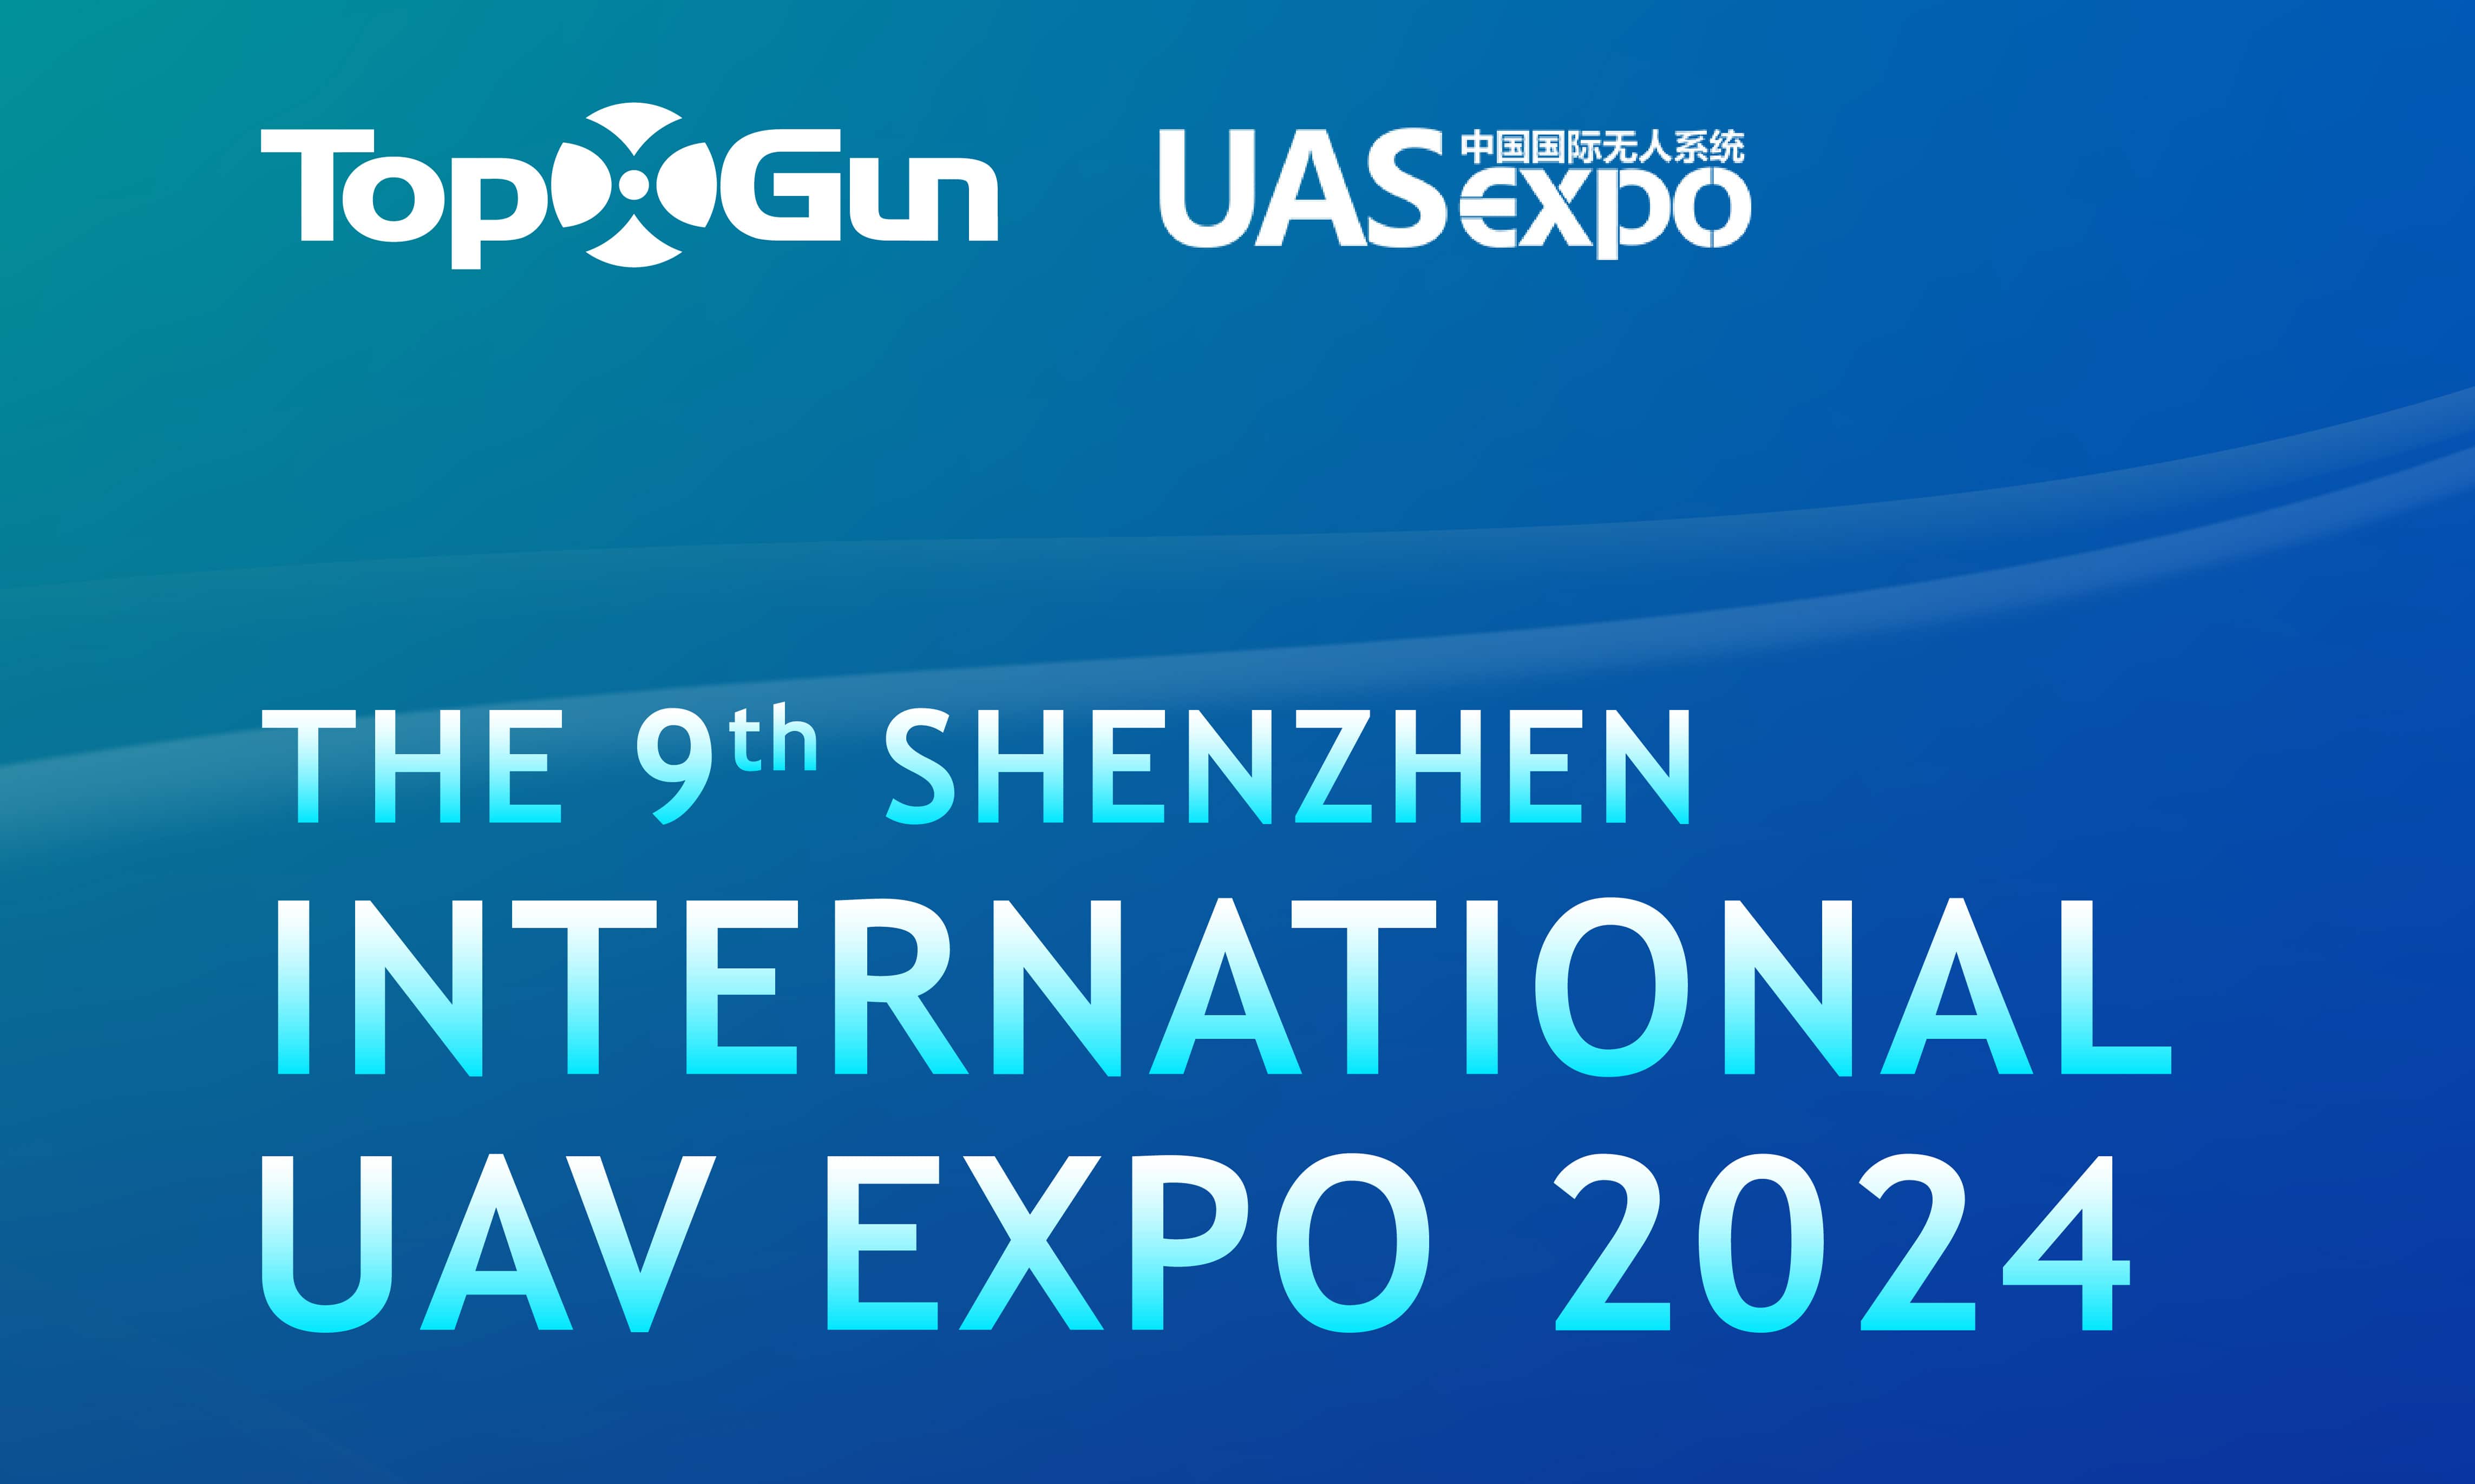 Join Us at the 9th Shenzhen International UAV Expo 2024 (UAS Expo)